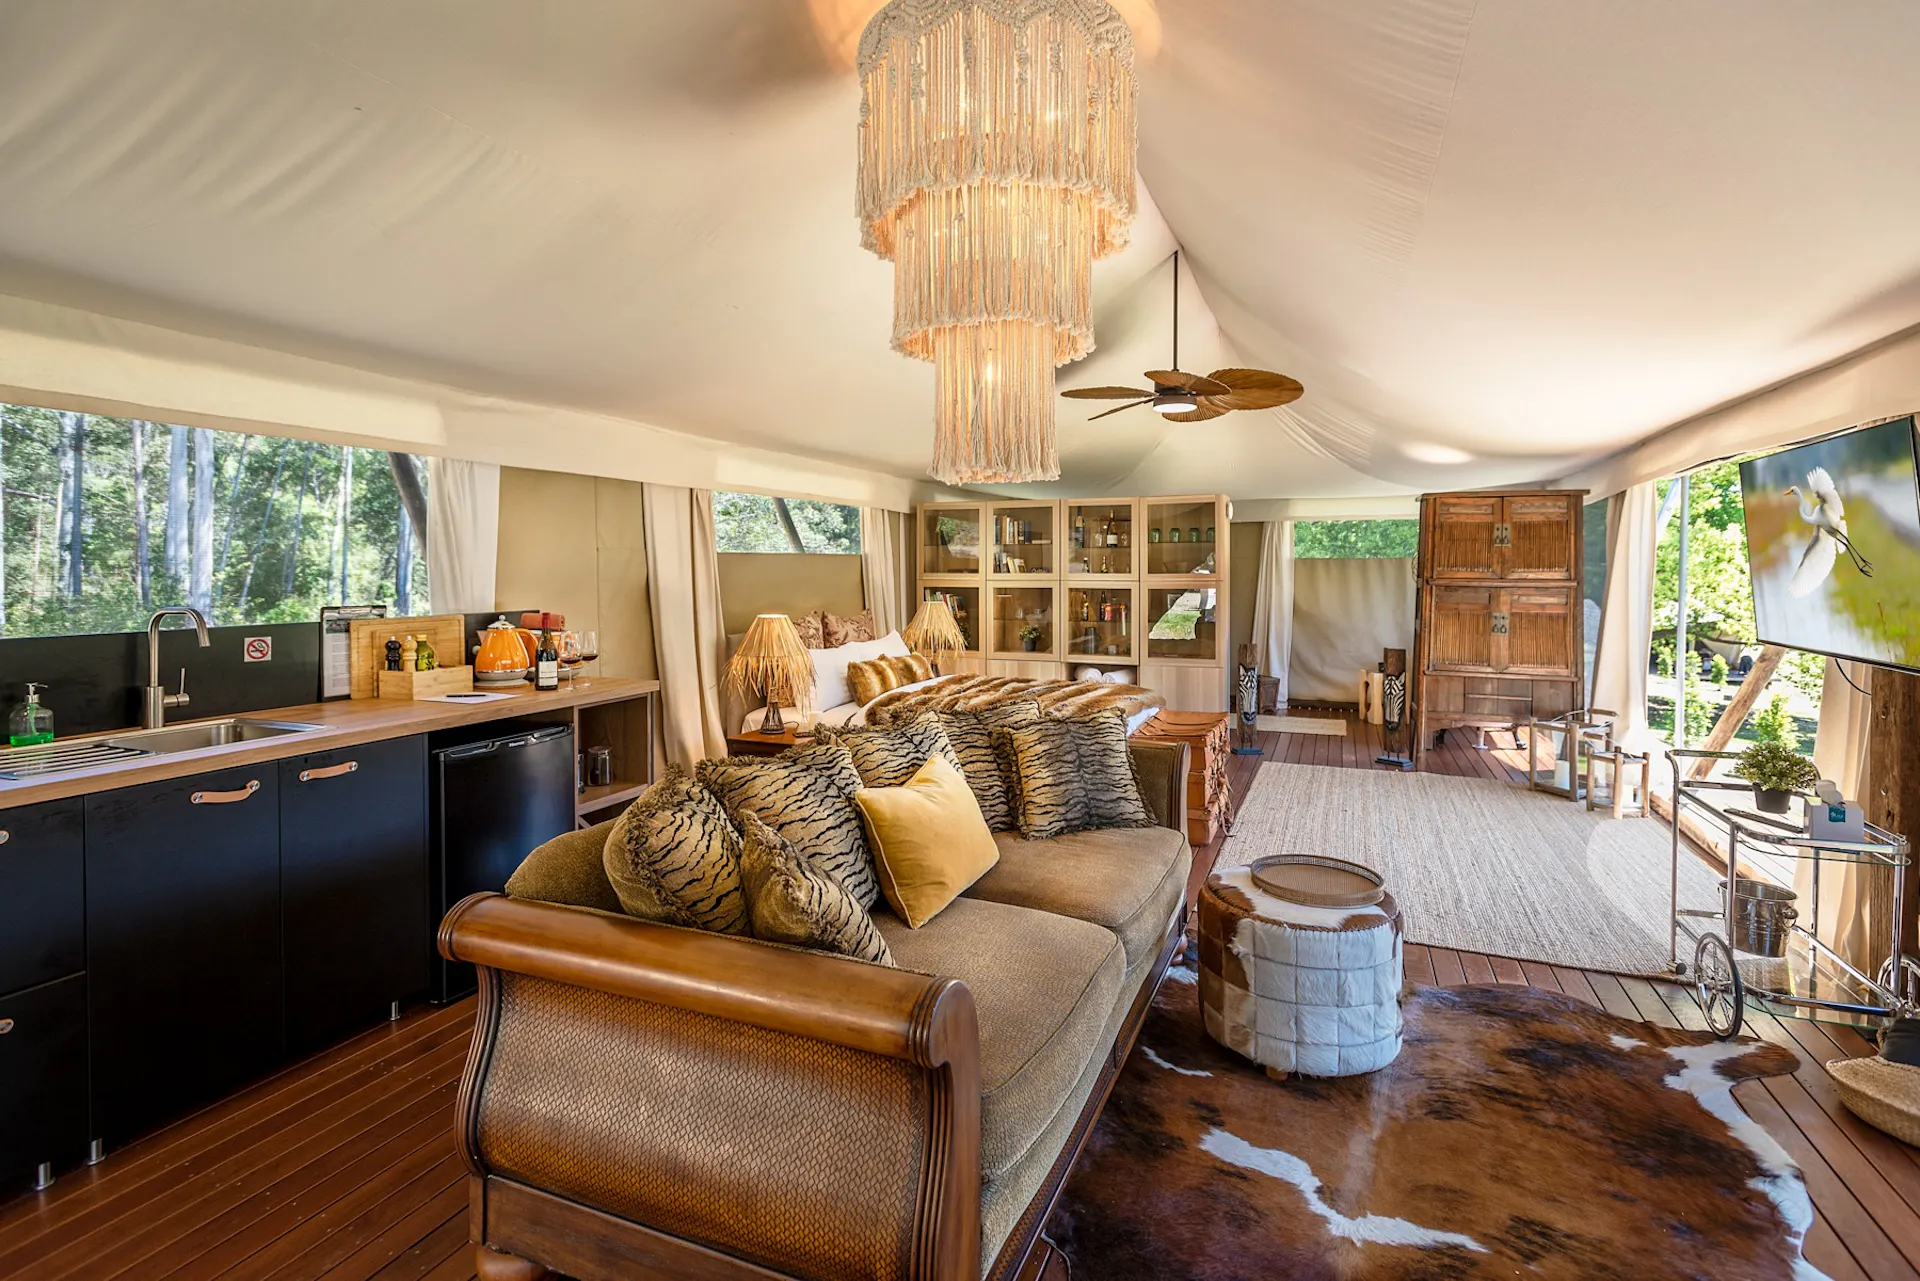 Our most secluded and luxurious Safari tent.... Out of Africa stands at the end of our valley